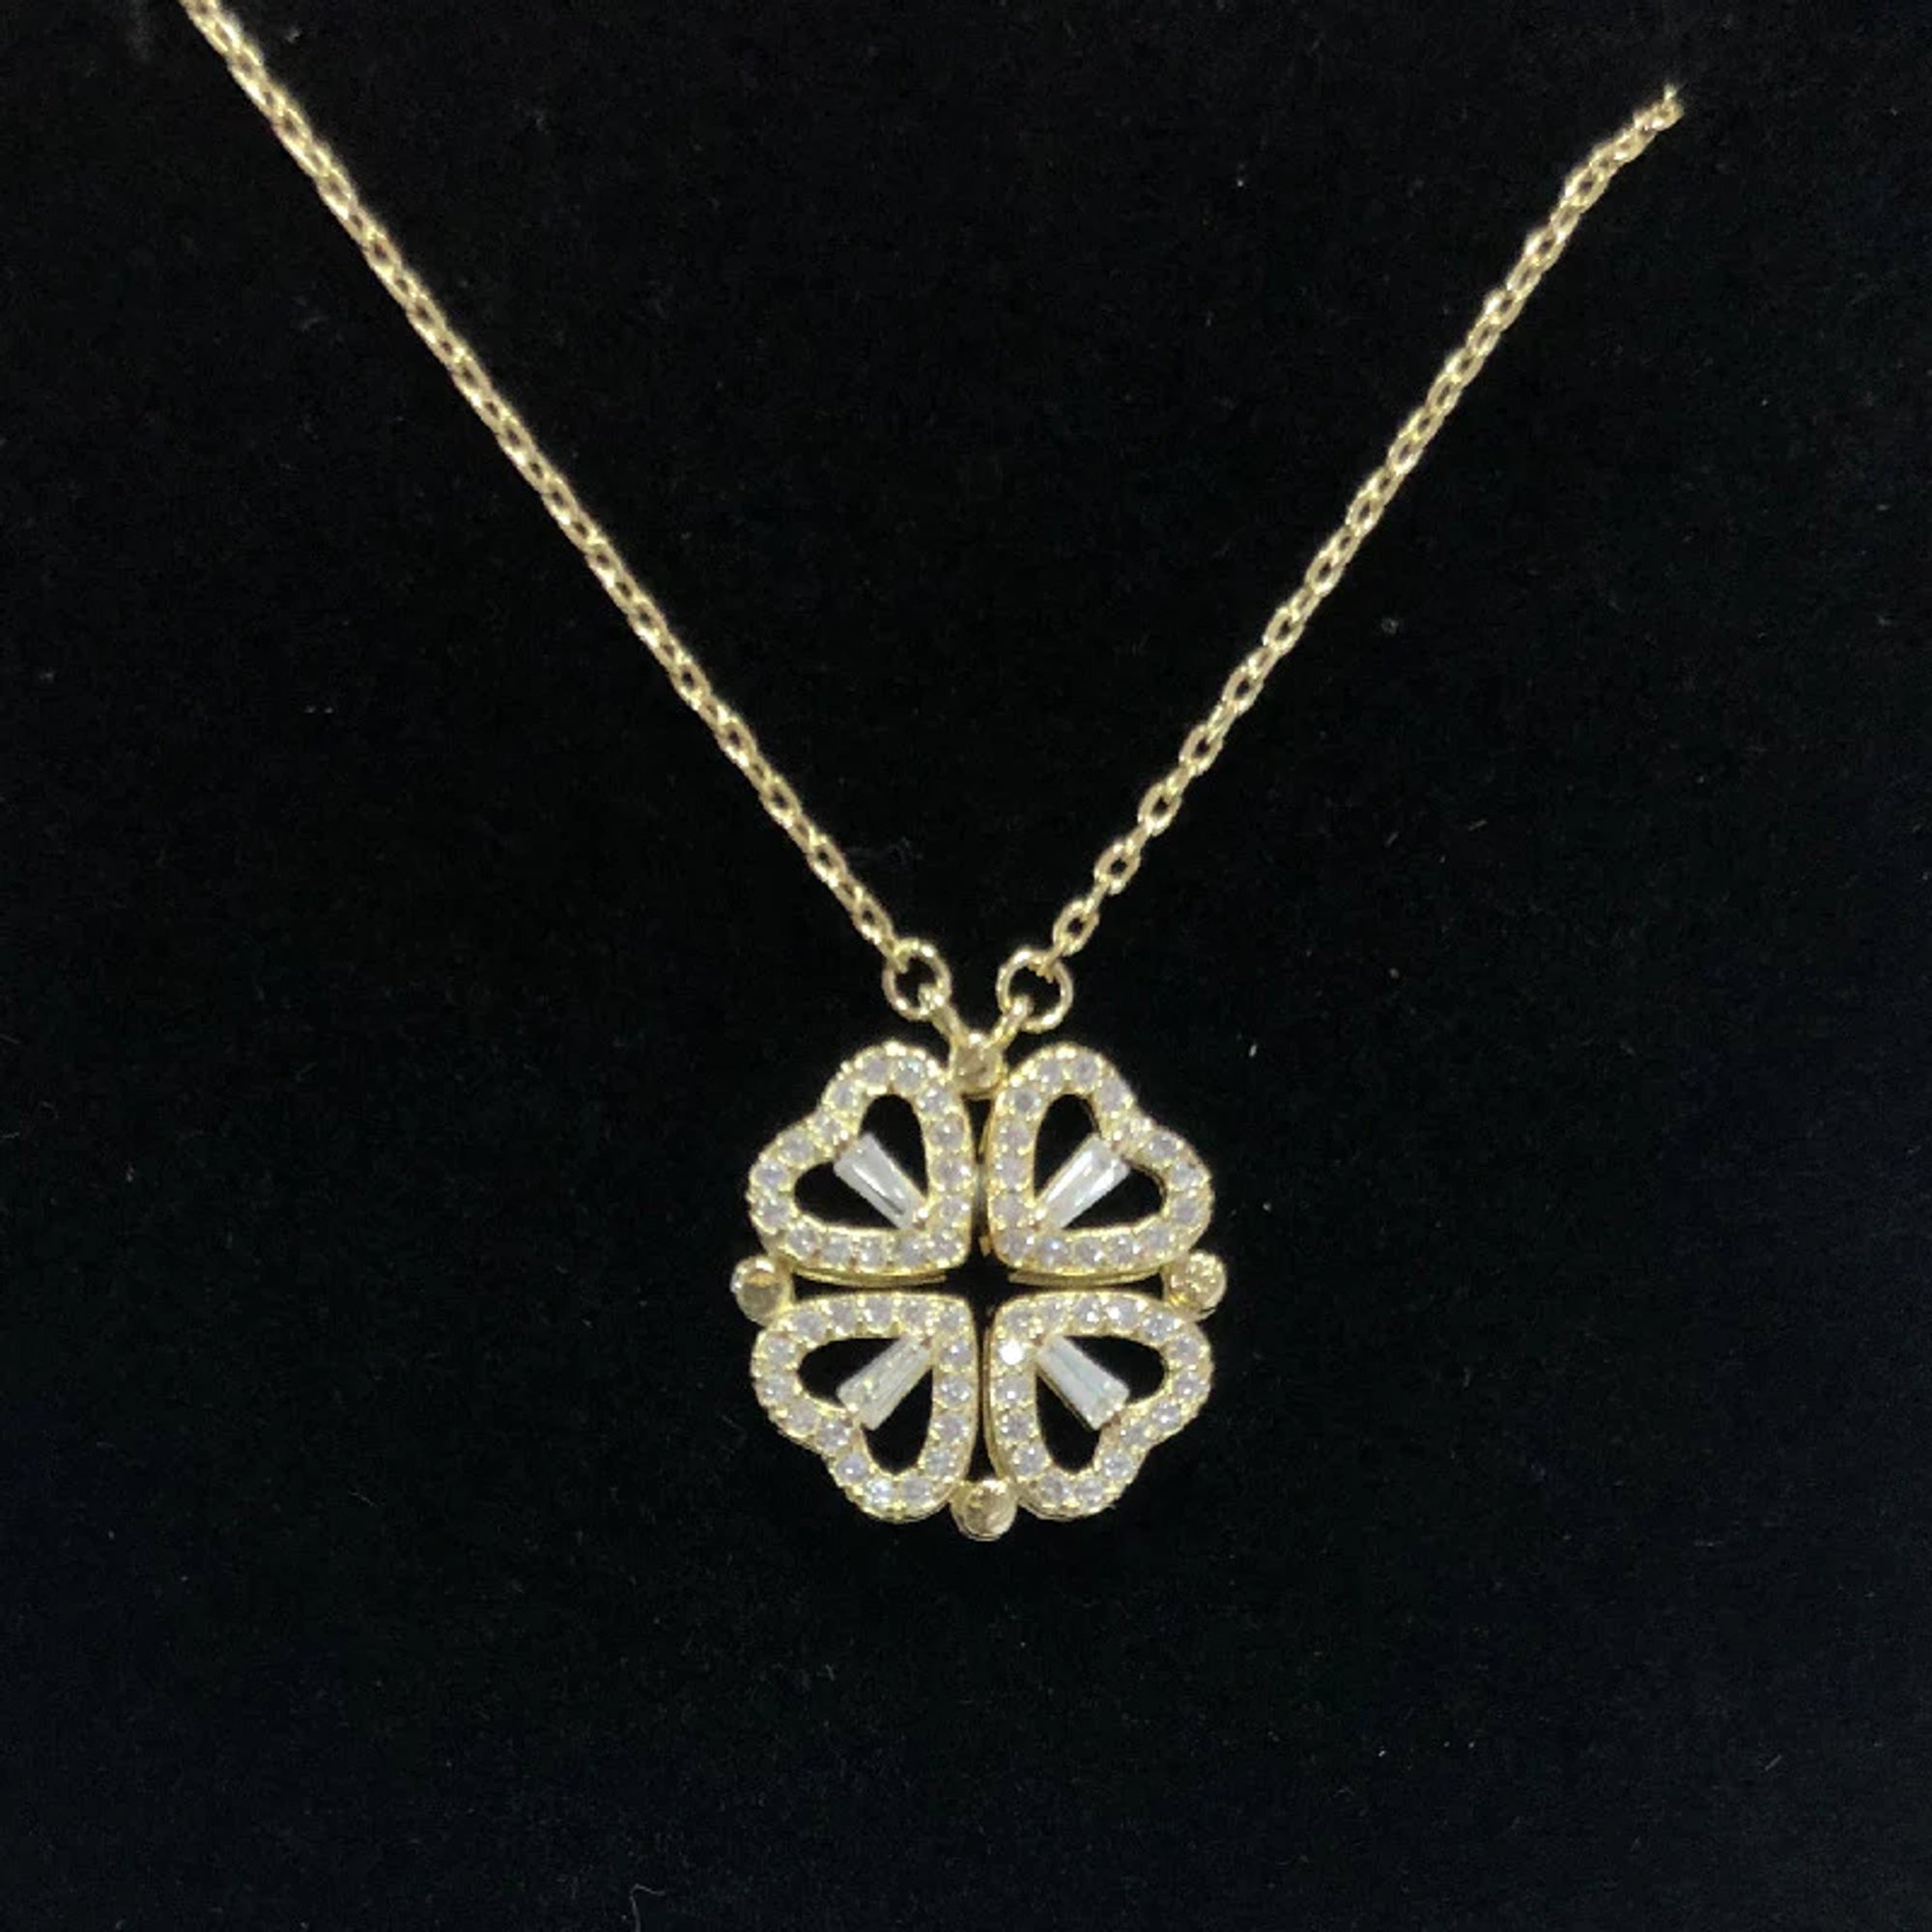 Deluxe Gold Clover Necklace